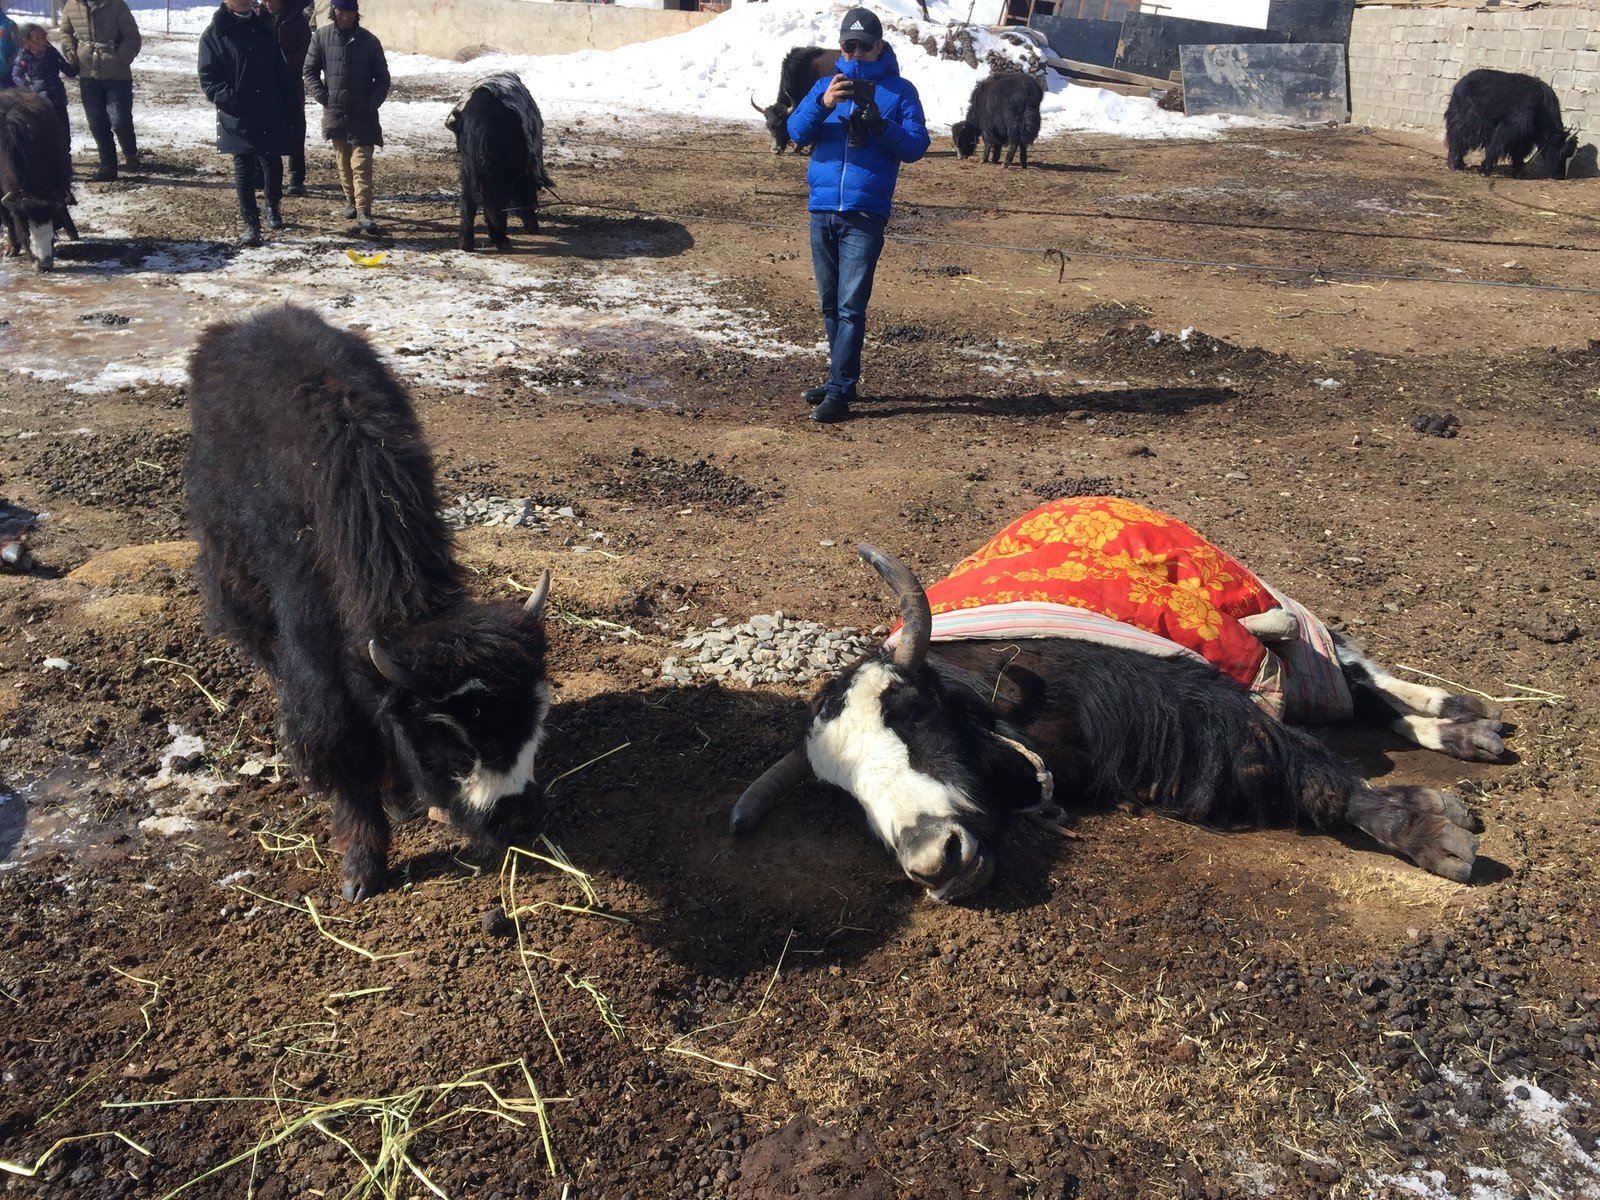 Despite having quilts, the snowstorms still claimed the lives of many yaks. 